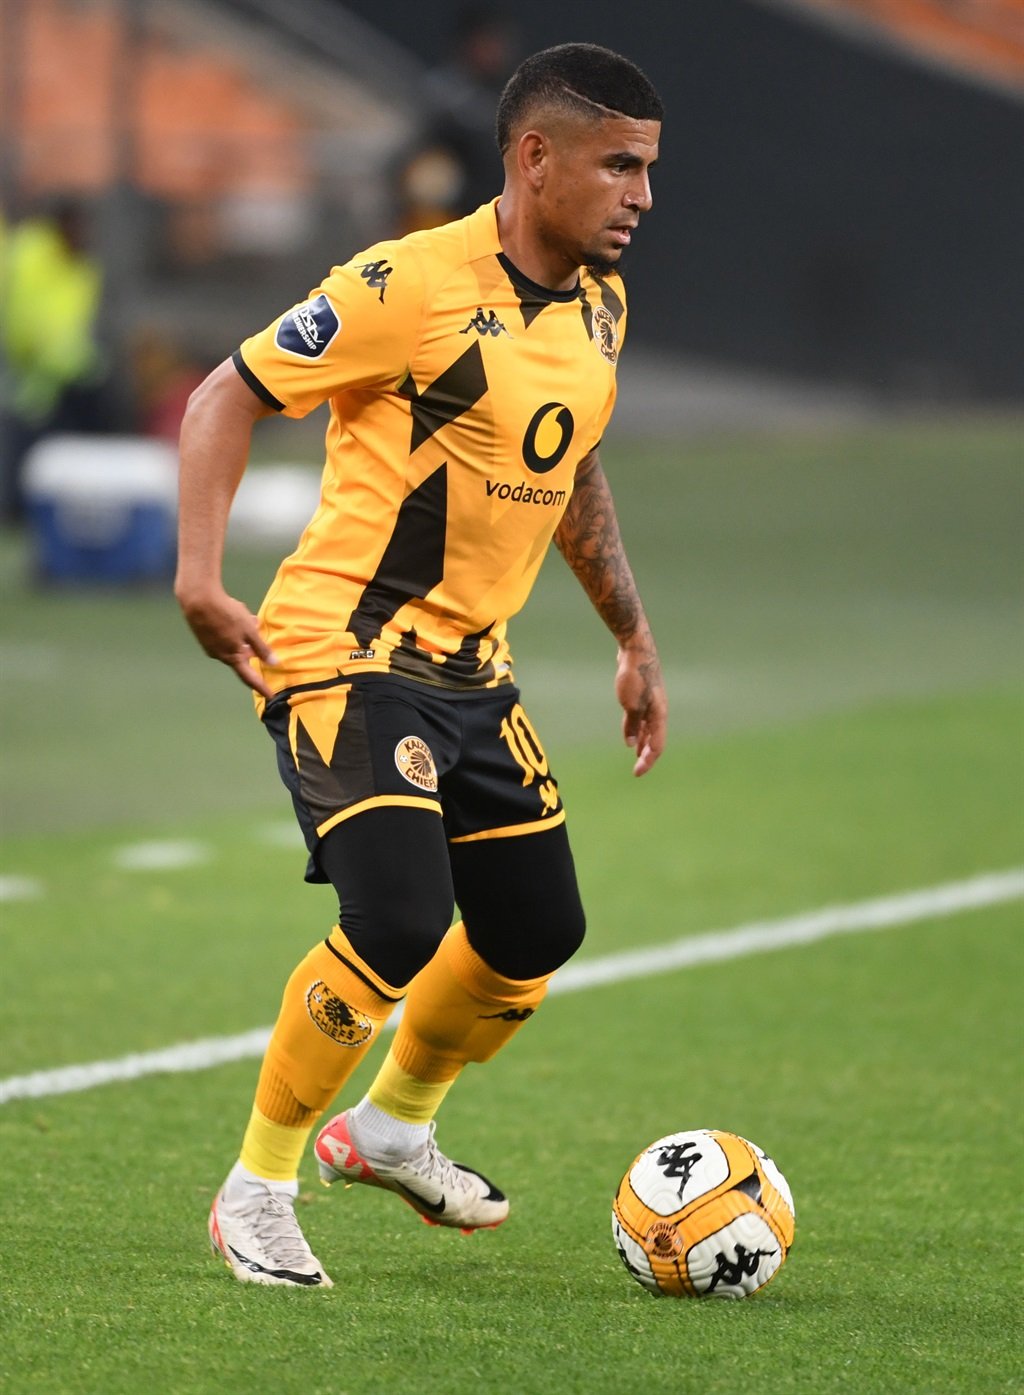 JOHANNESBURG, SOUTH AFRICA - NOVEMBER 08: Keagan Dolly of Kaizer Chiefs during the DStv Premiership match between Kaizer Chiefs and Cape Town Spurs at FNB Stadium on November 08, 2023 in Johannesburg, South Africa. (Photo by Lee Warren/Gallo Images)